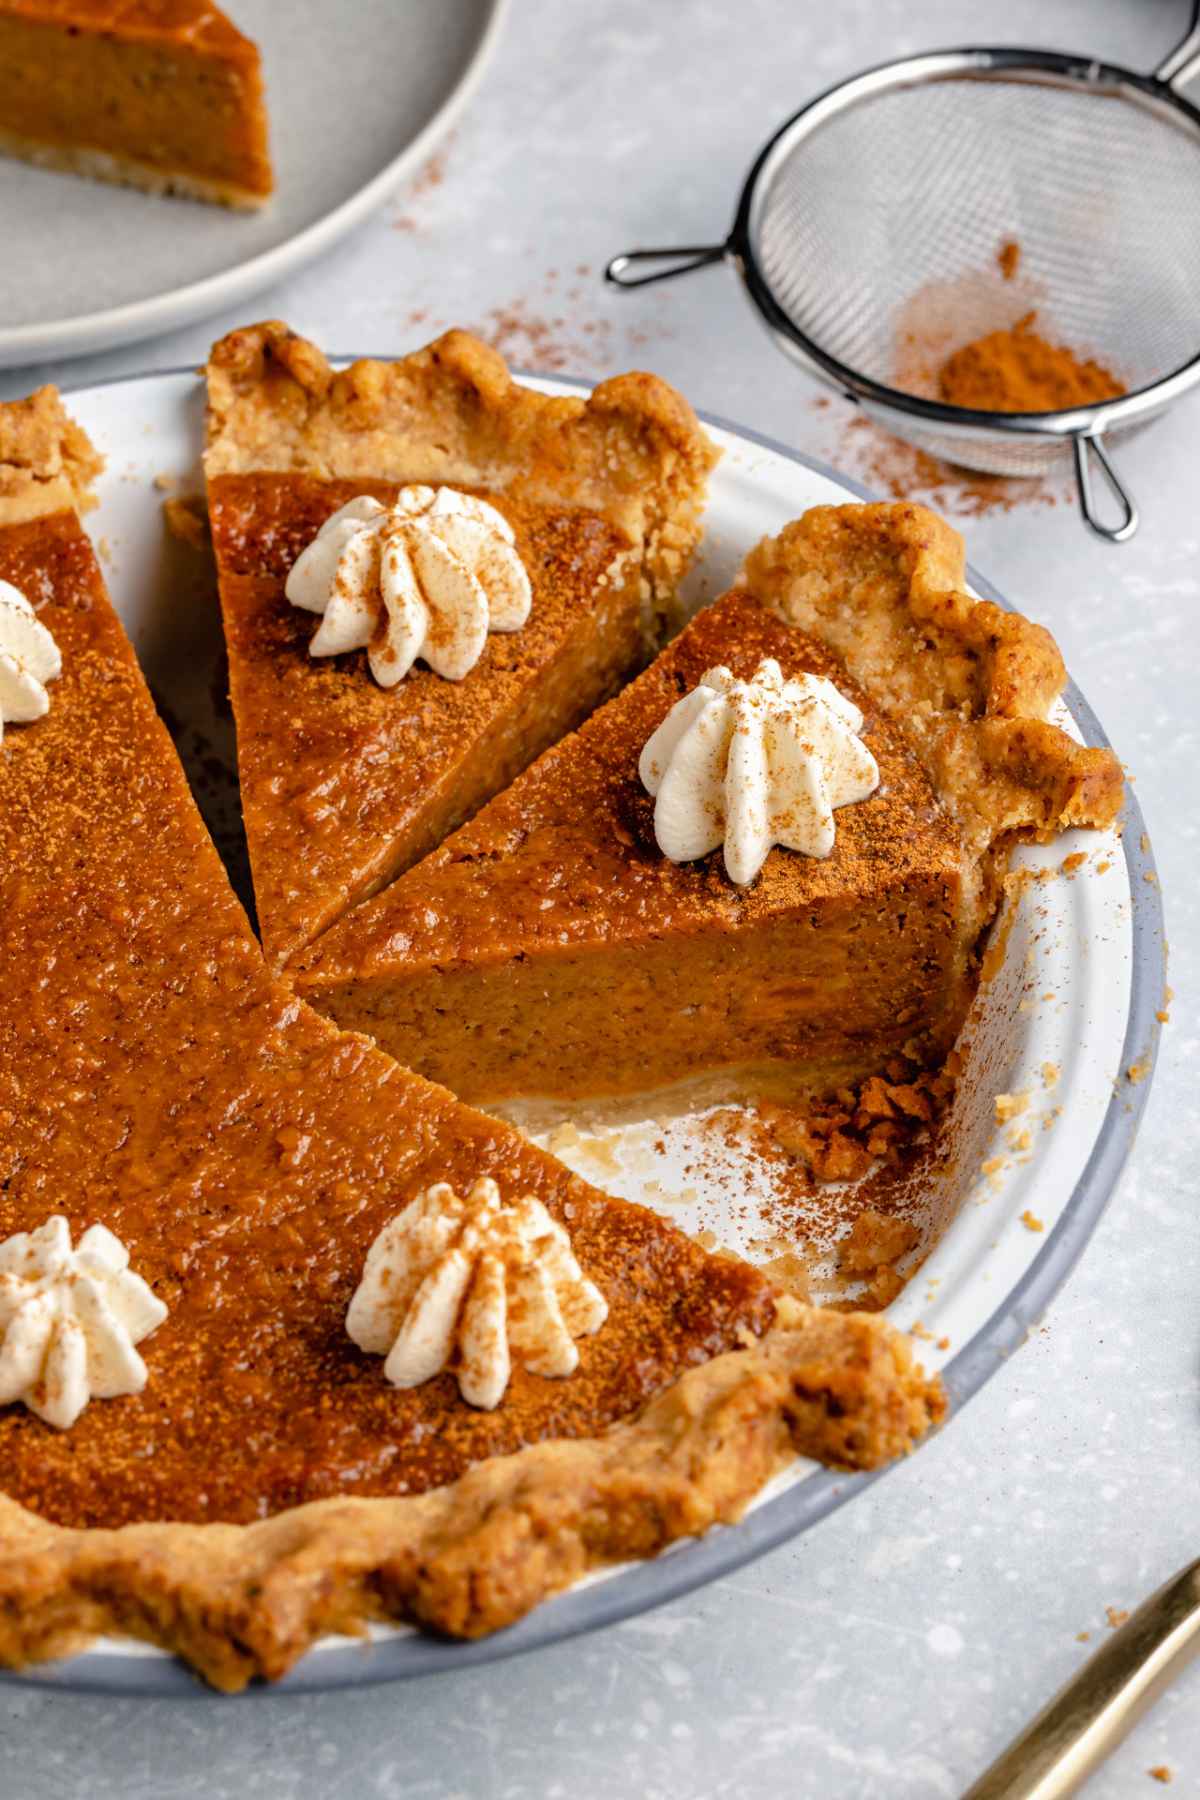 Slices of sweet potato pie topped with whipped cream in a pie plate.